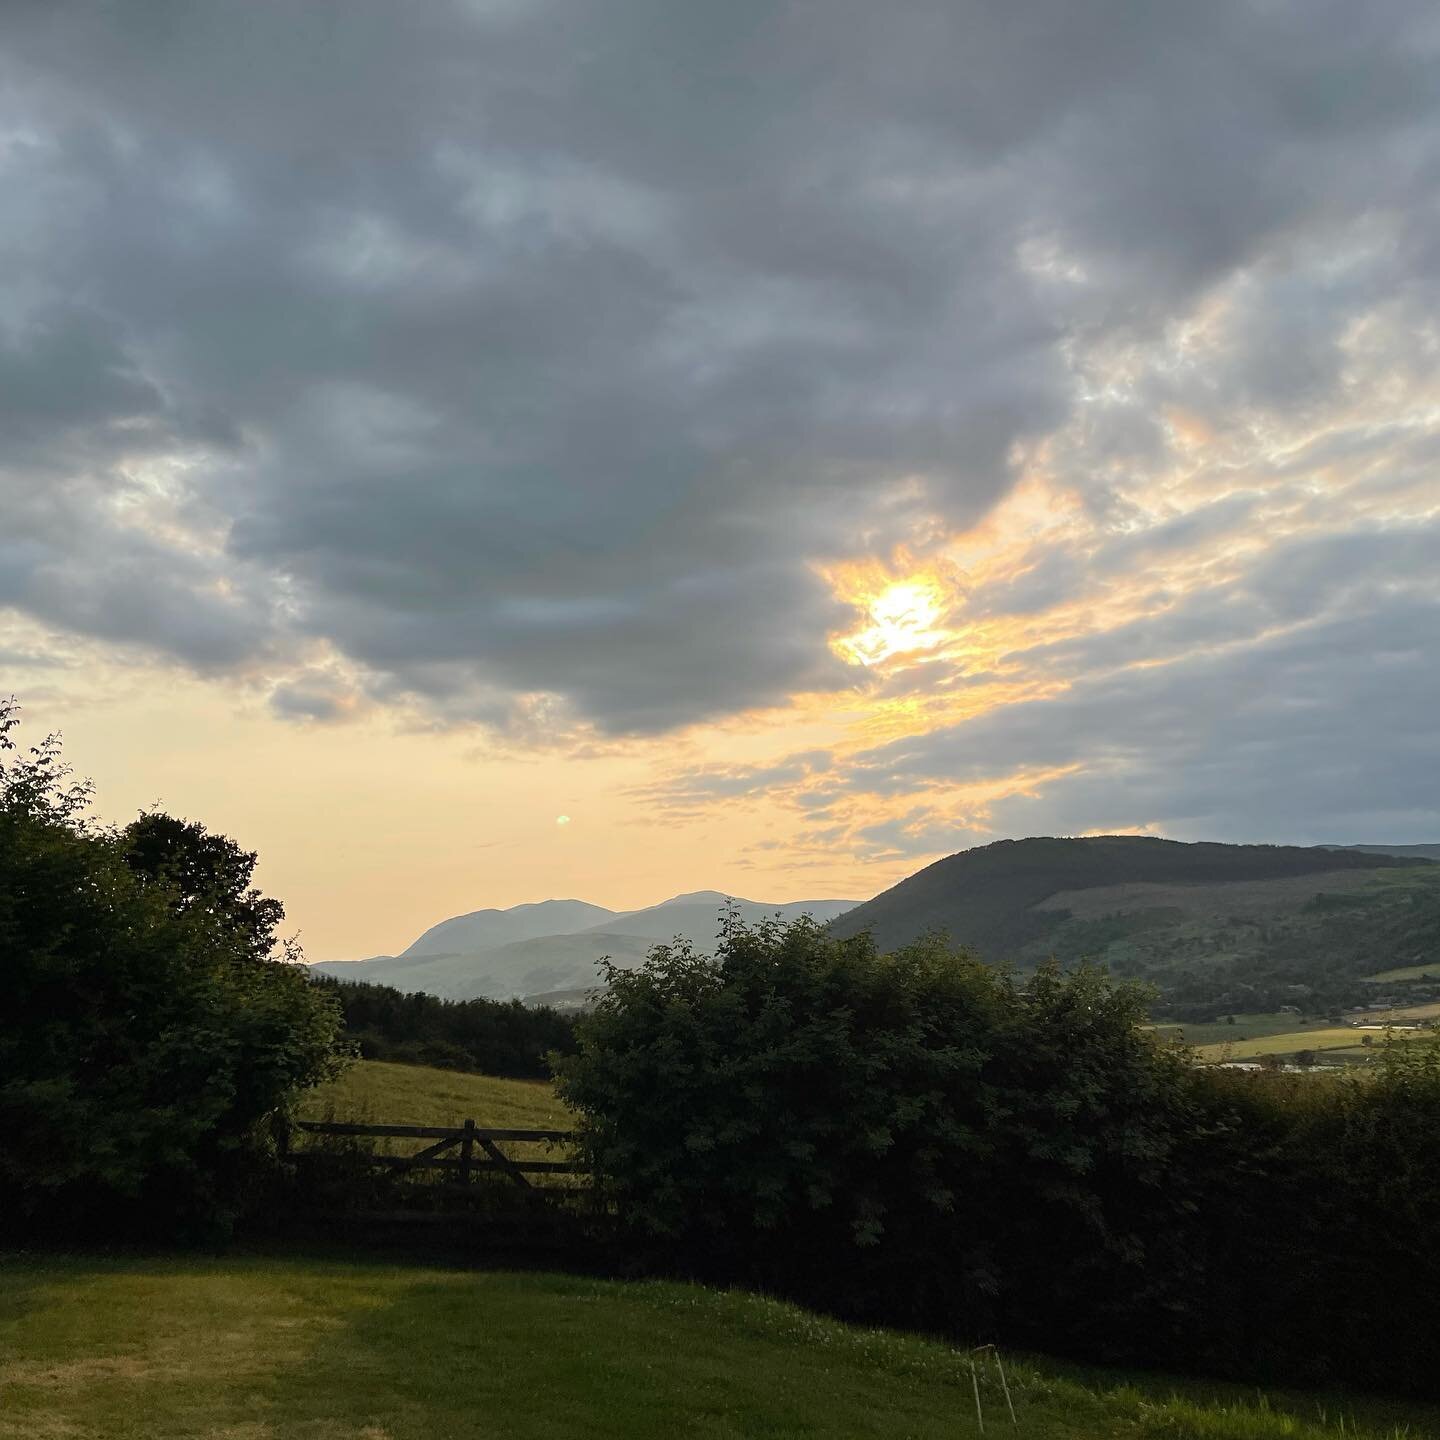 Sundowners looking West this evening. Beautiful Aberfeldy views. A spot to return to with the paints. 
&bull;
&bull;
&bull;
#sundowners #aberfeldy #viewpoints